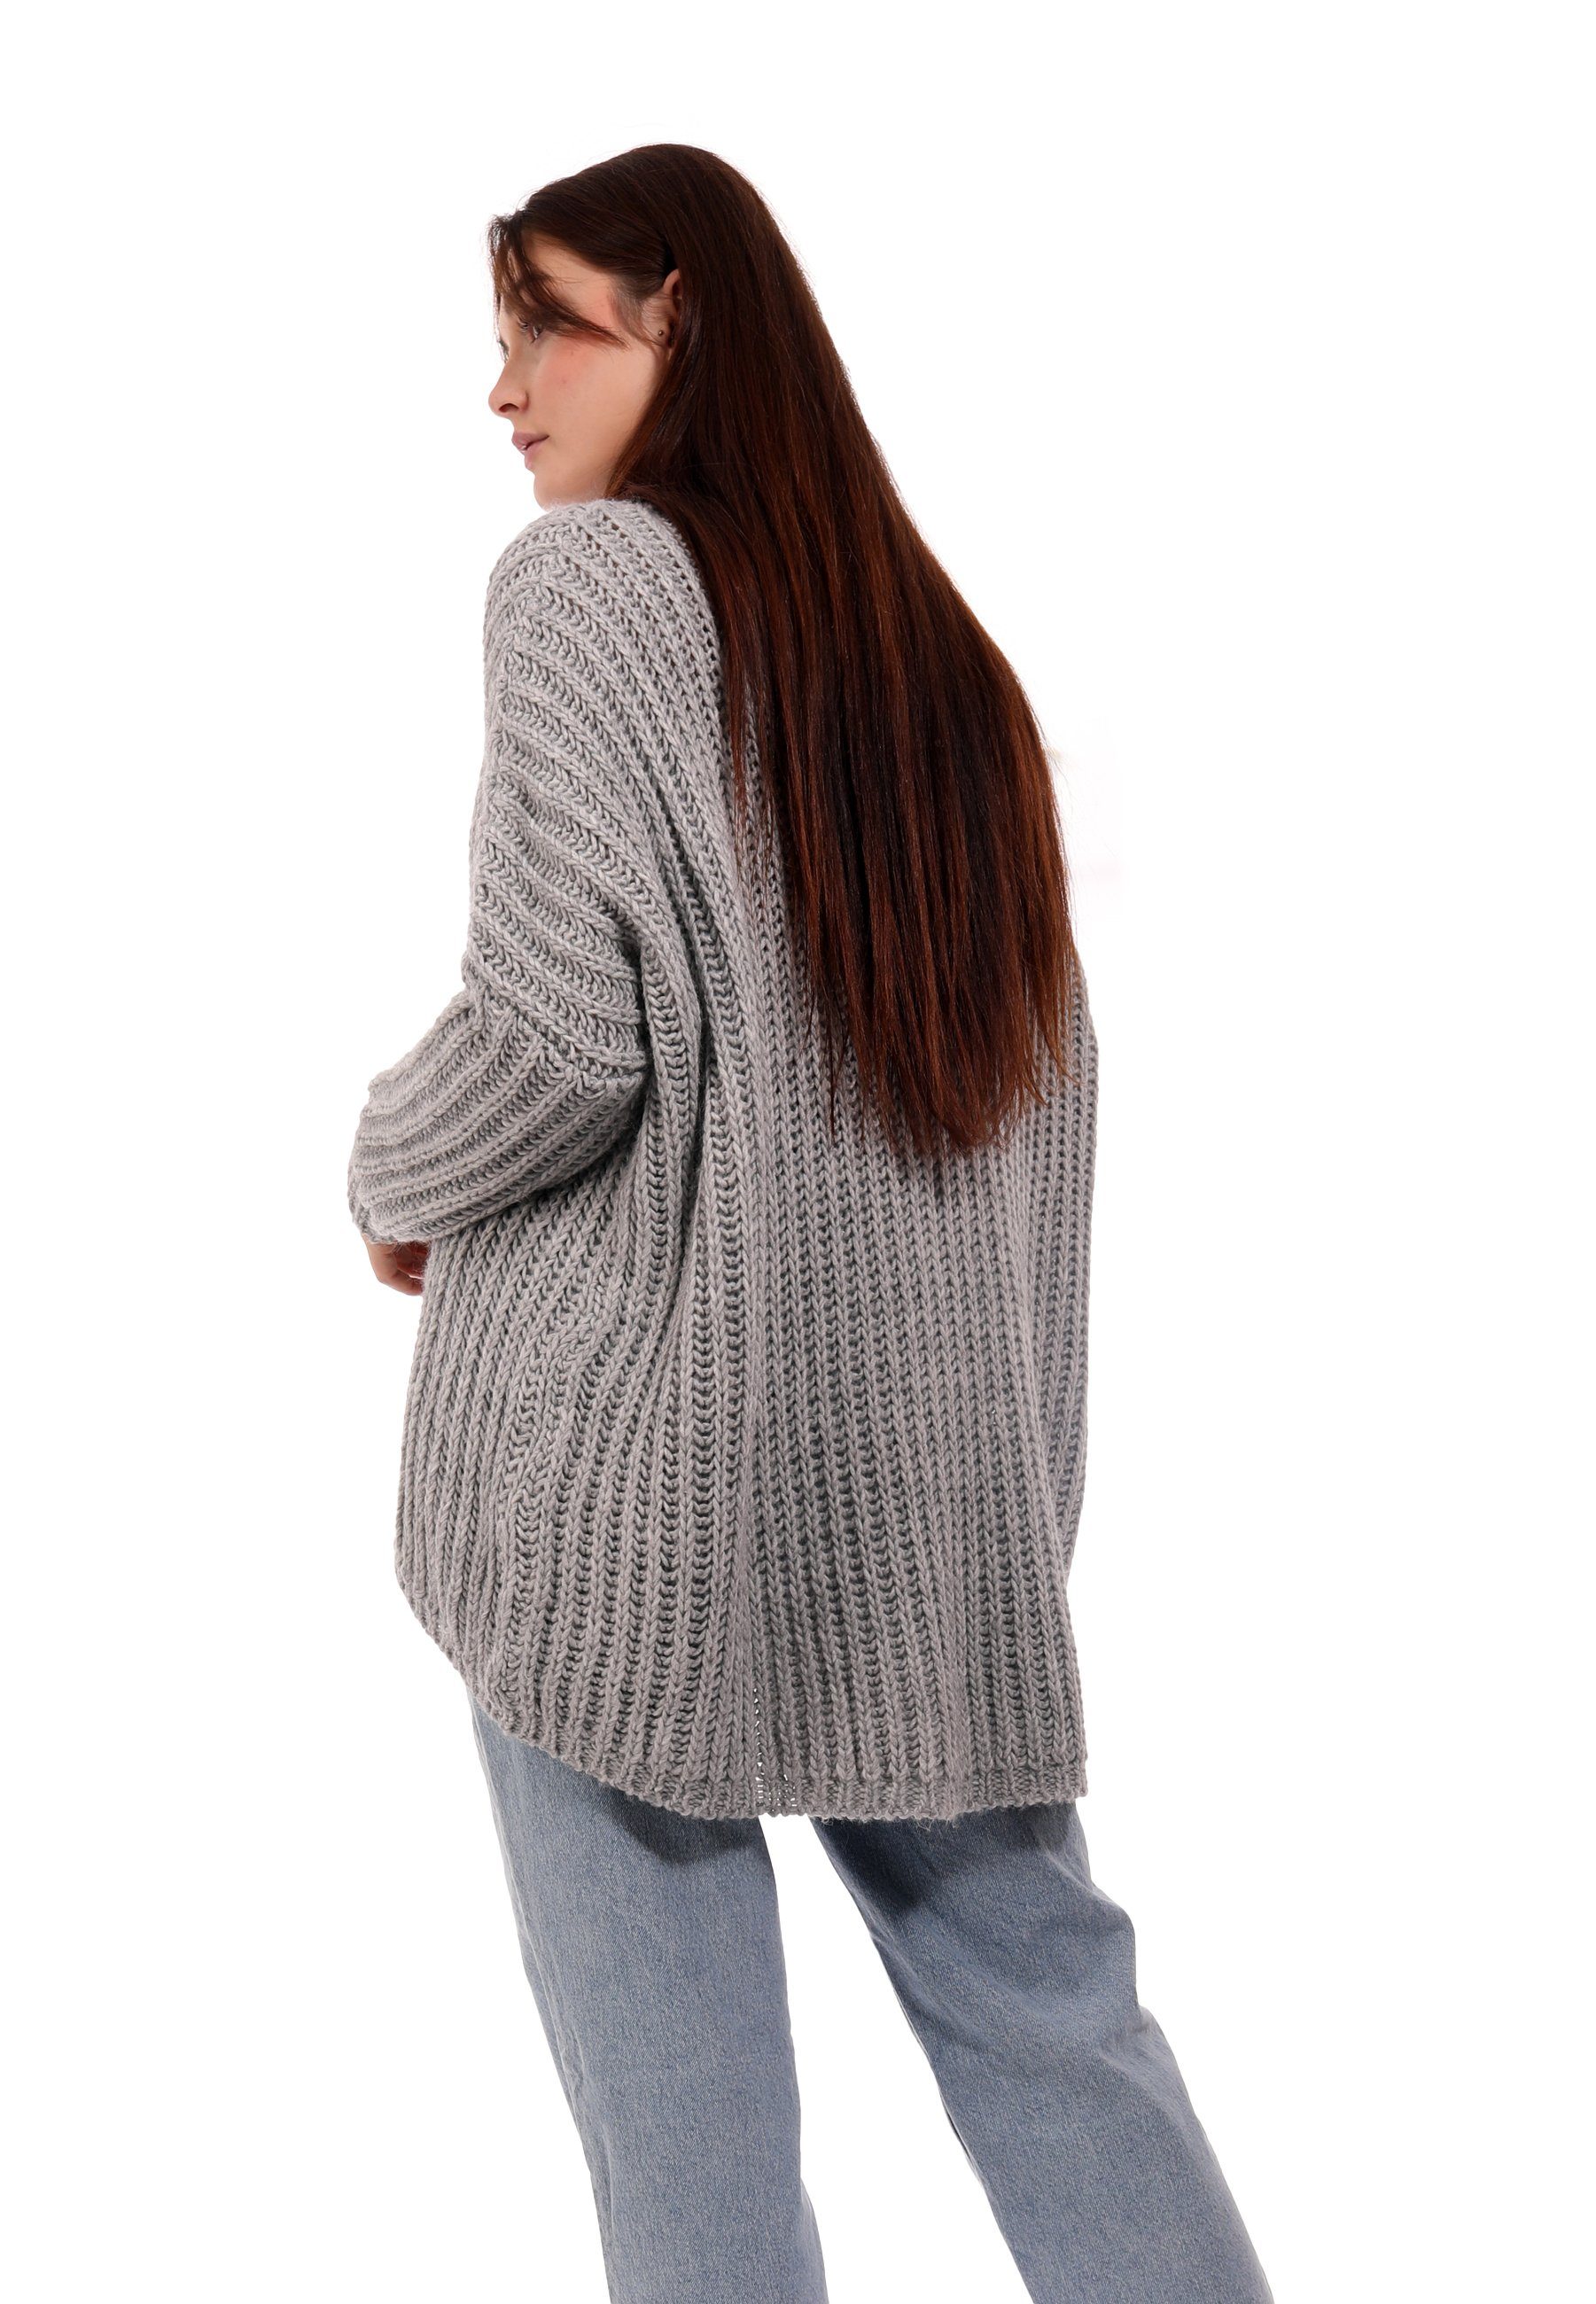 Oversized & One Size casual Fashion YC Longpullover grau Vokuhila (1-tlg) Pullover Sweater Grobstrick Style